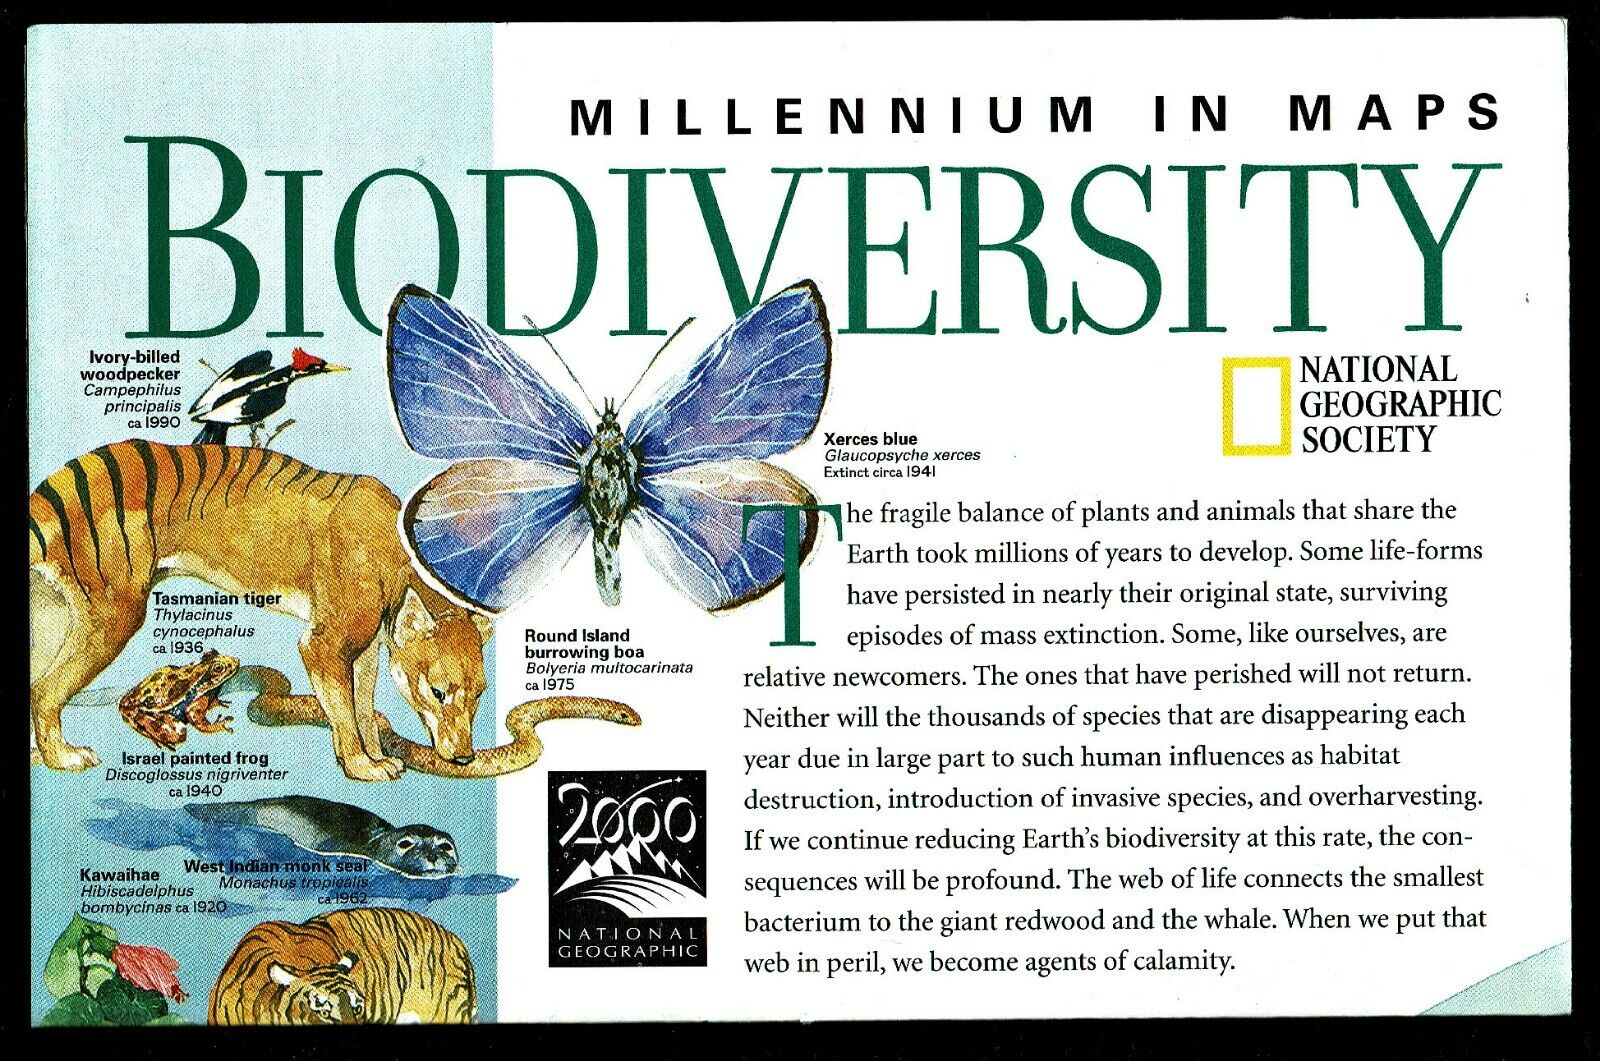 ⫸ 1999-2 February BIODIVERSITY Millennium Maps Geographic Map EARTH'S BALANCE A3